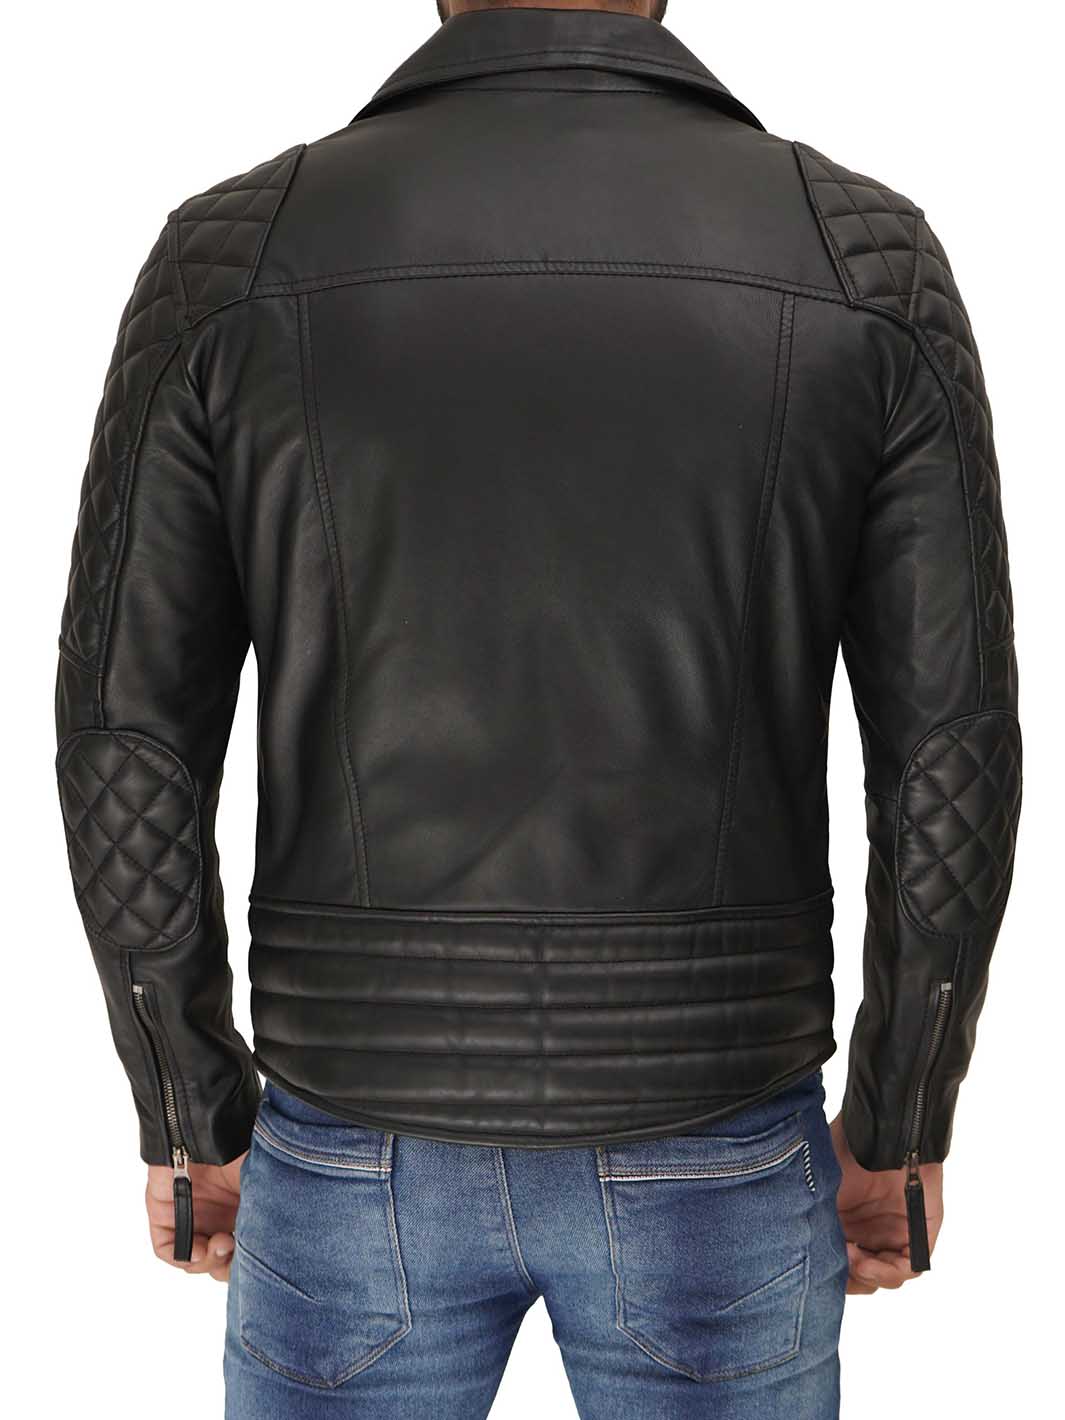 Frisco Mens Black Quilted Asymmetrical Leather Jacket